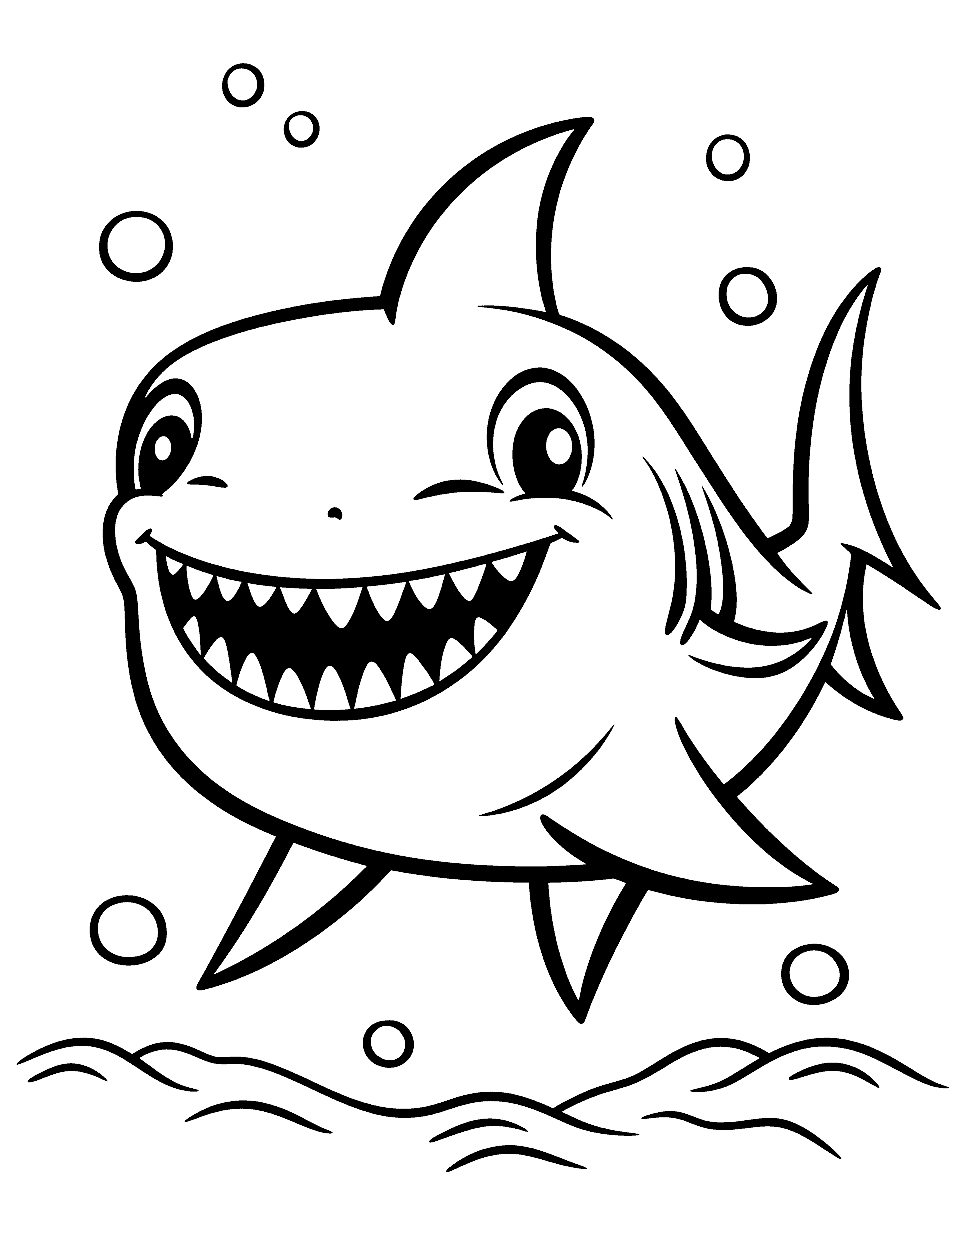 Simple Baby Shark Coloring Page - A simple line art of a cute baby shark for younger kids to color in.